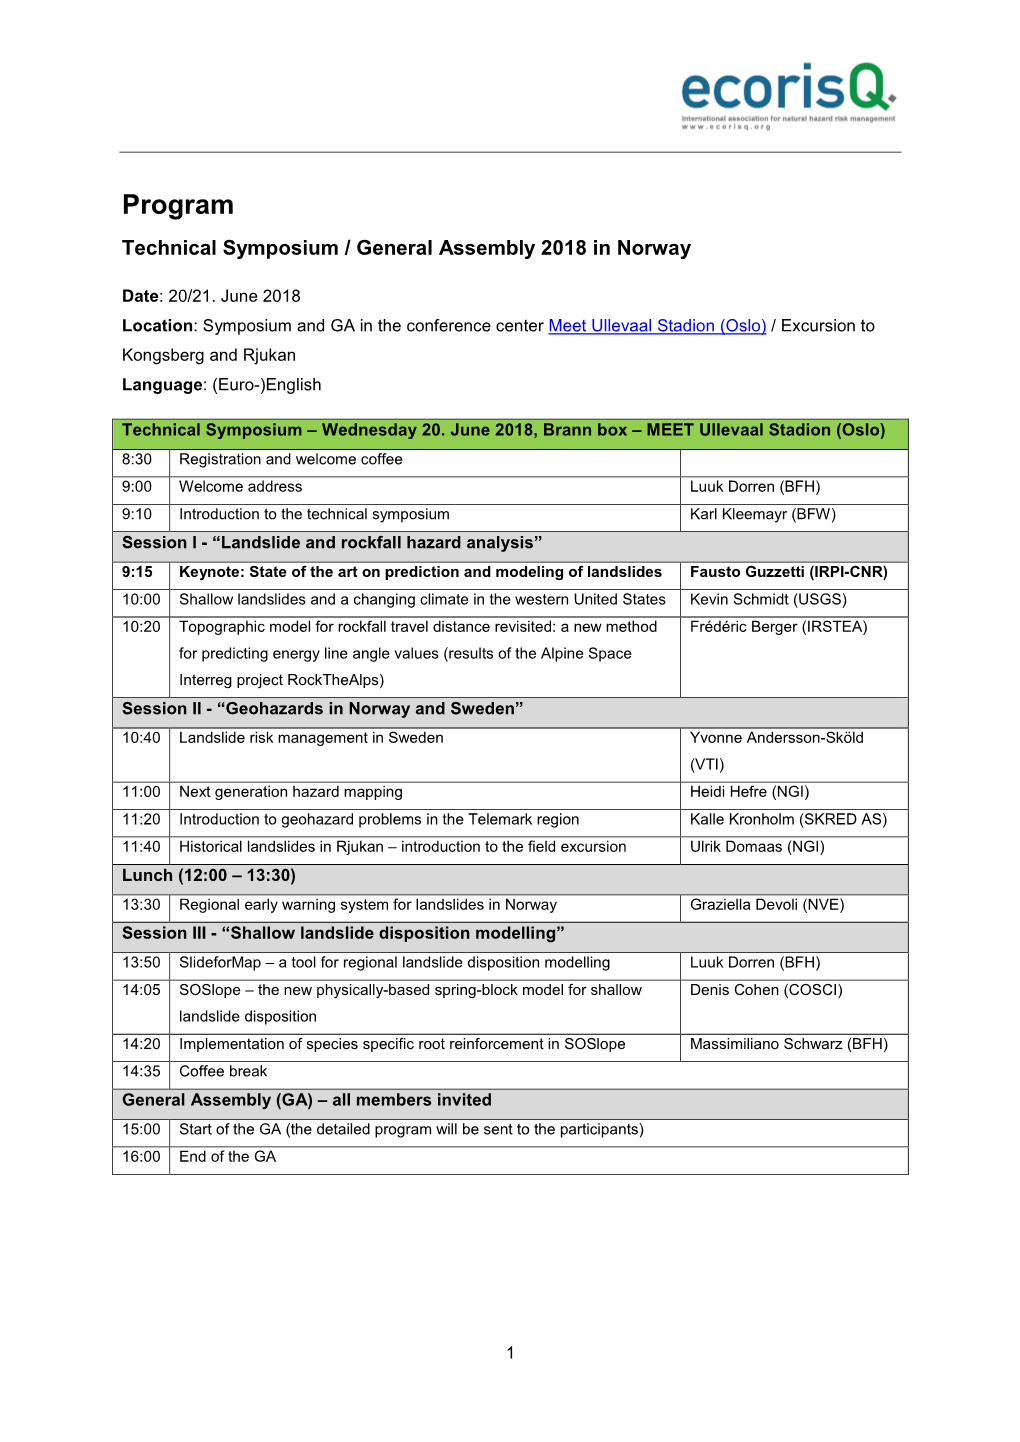 Program Technical Symposium / General Assembly 2018 in Norway